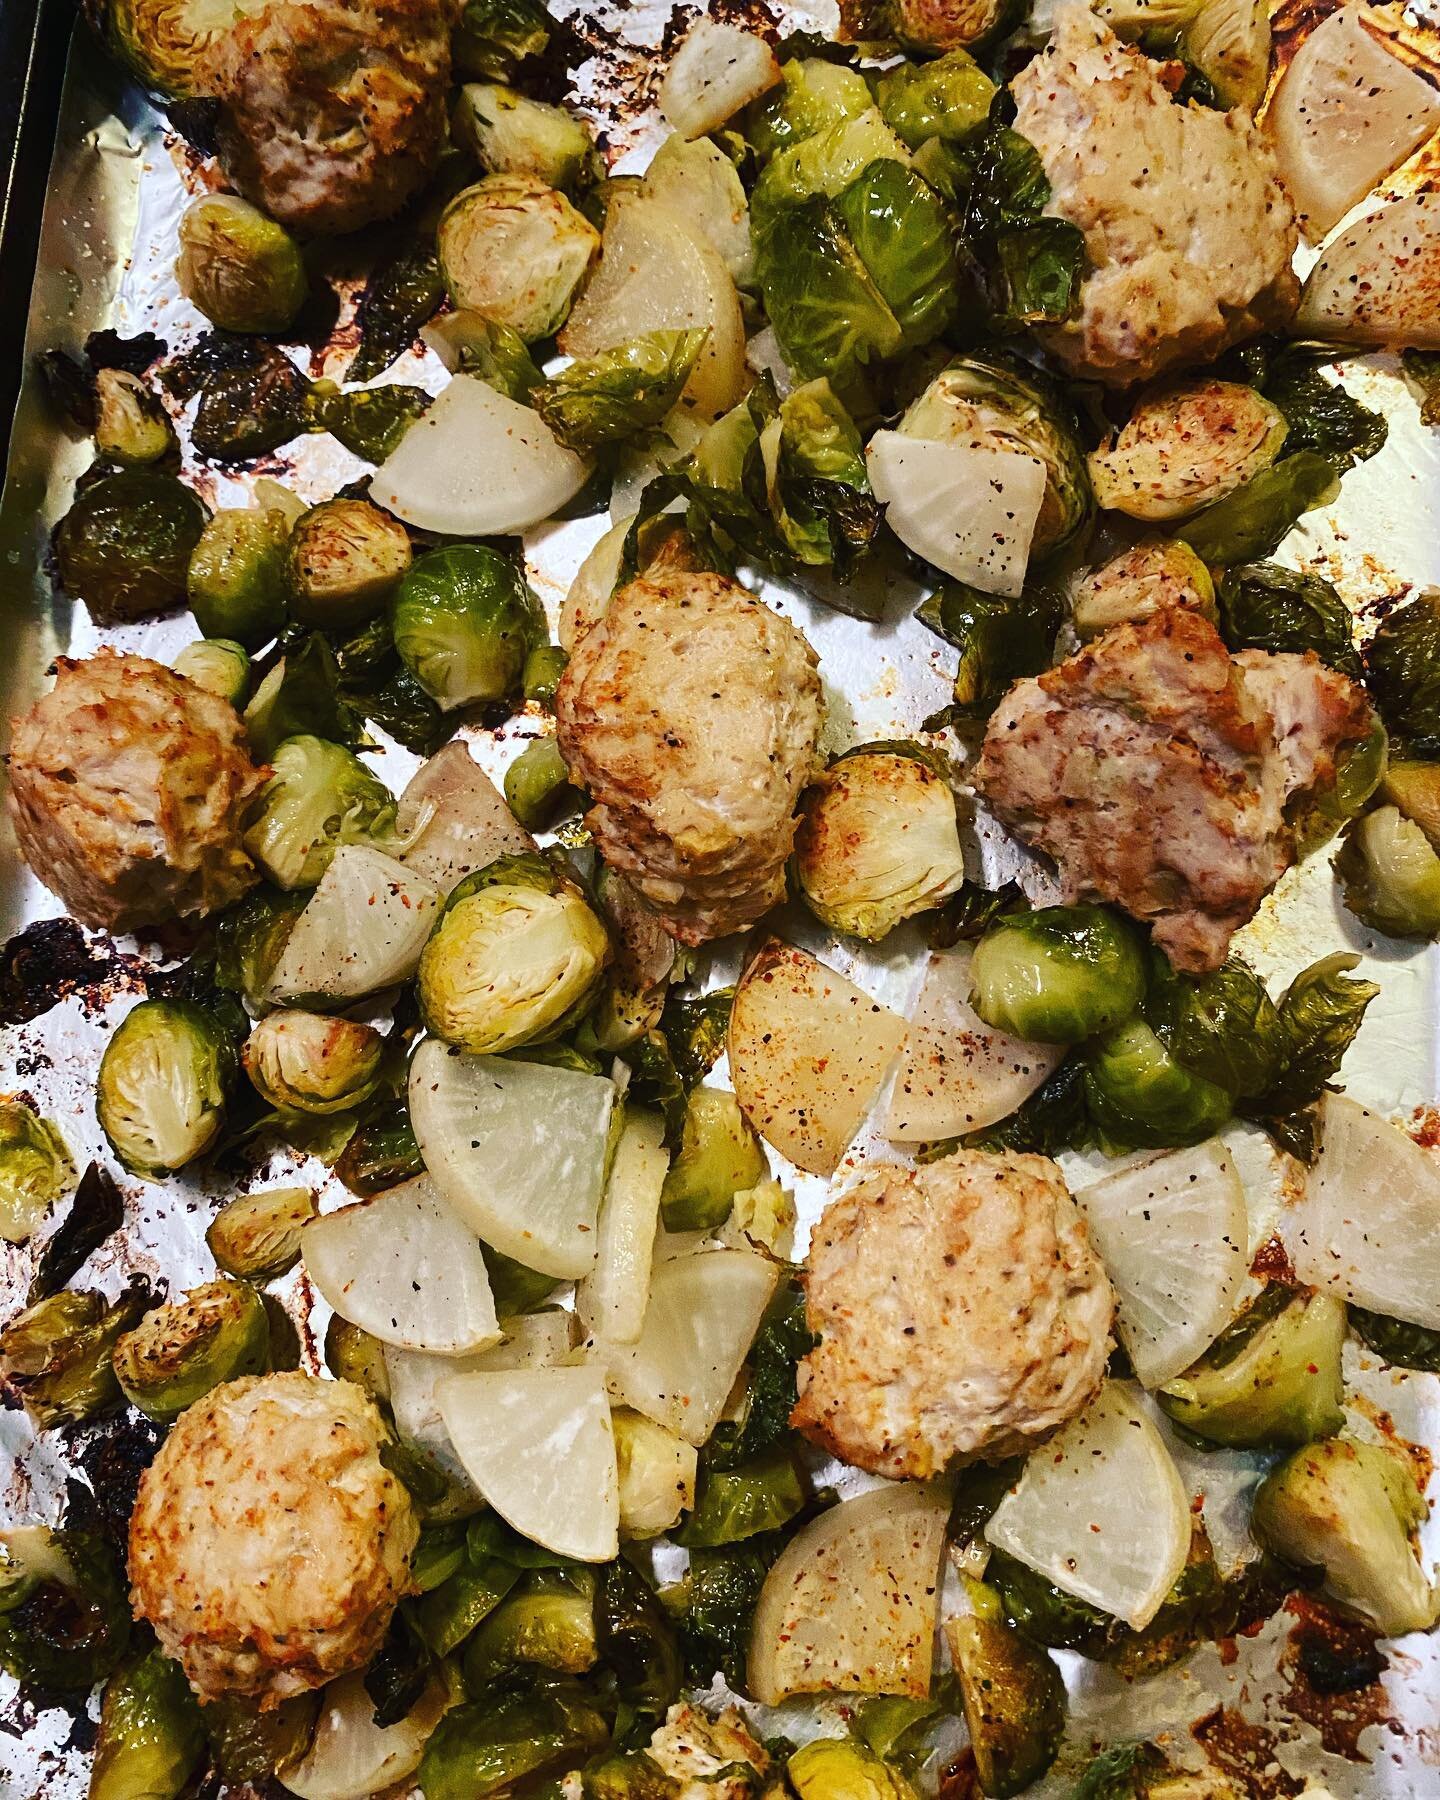 SHEET PAN DINNERS really do rule! 
Easy peasy, hearty and healthy. Any ground protein weather animal or plant based works great for the balls. Many winter veggies have similar roasting times, while some veggies even when a little over done are pretty